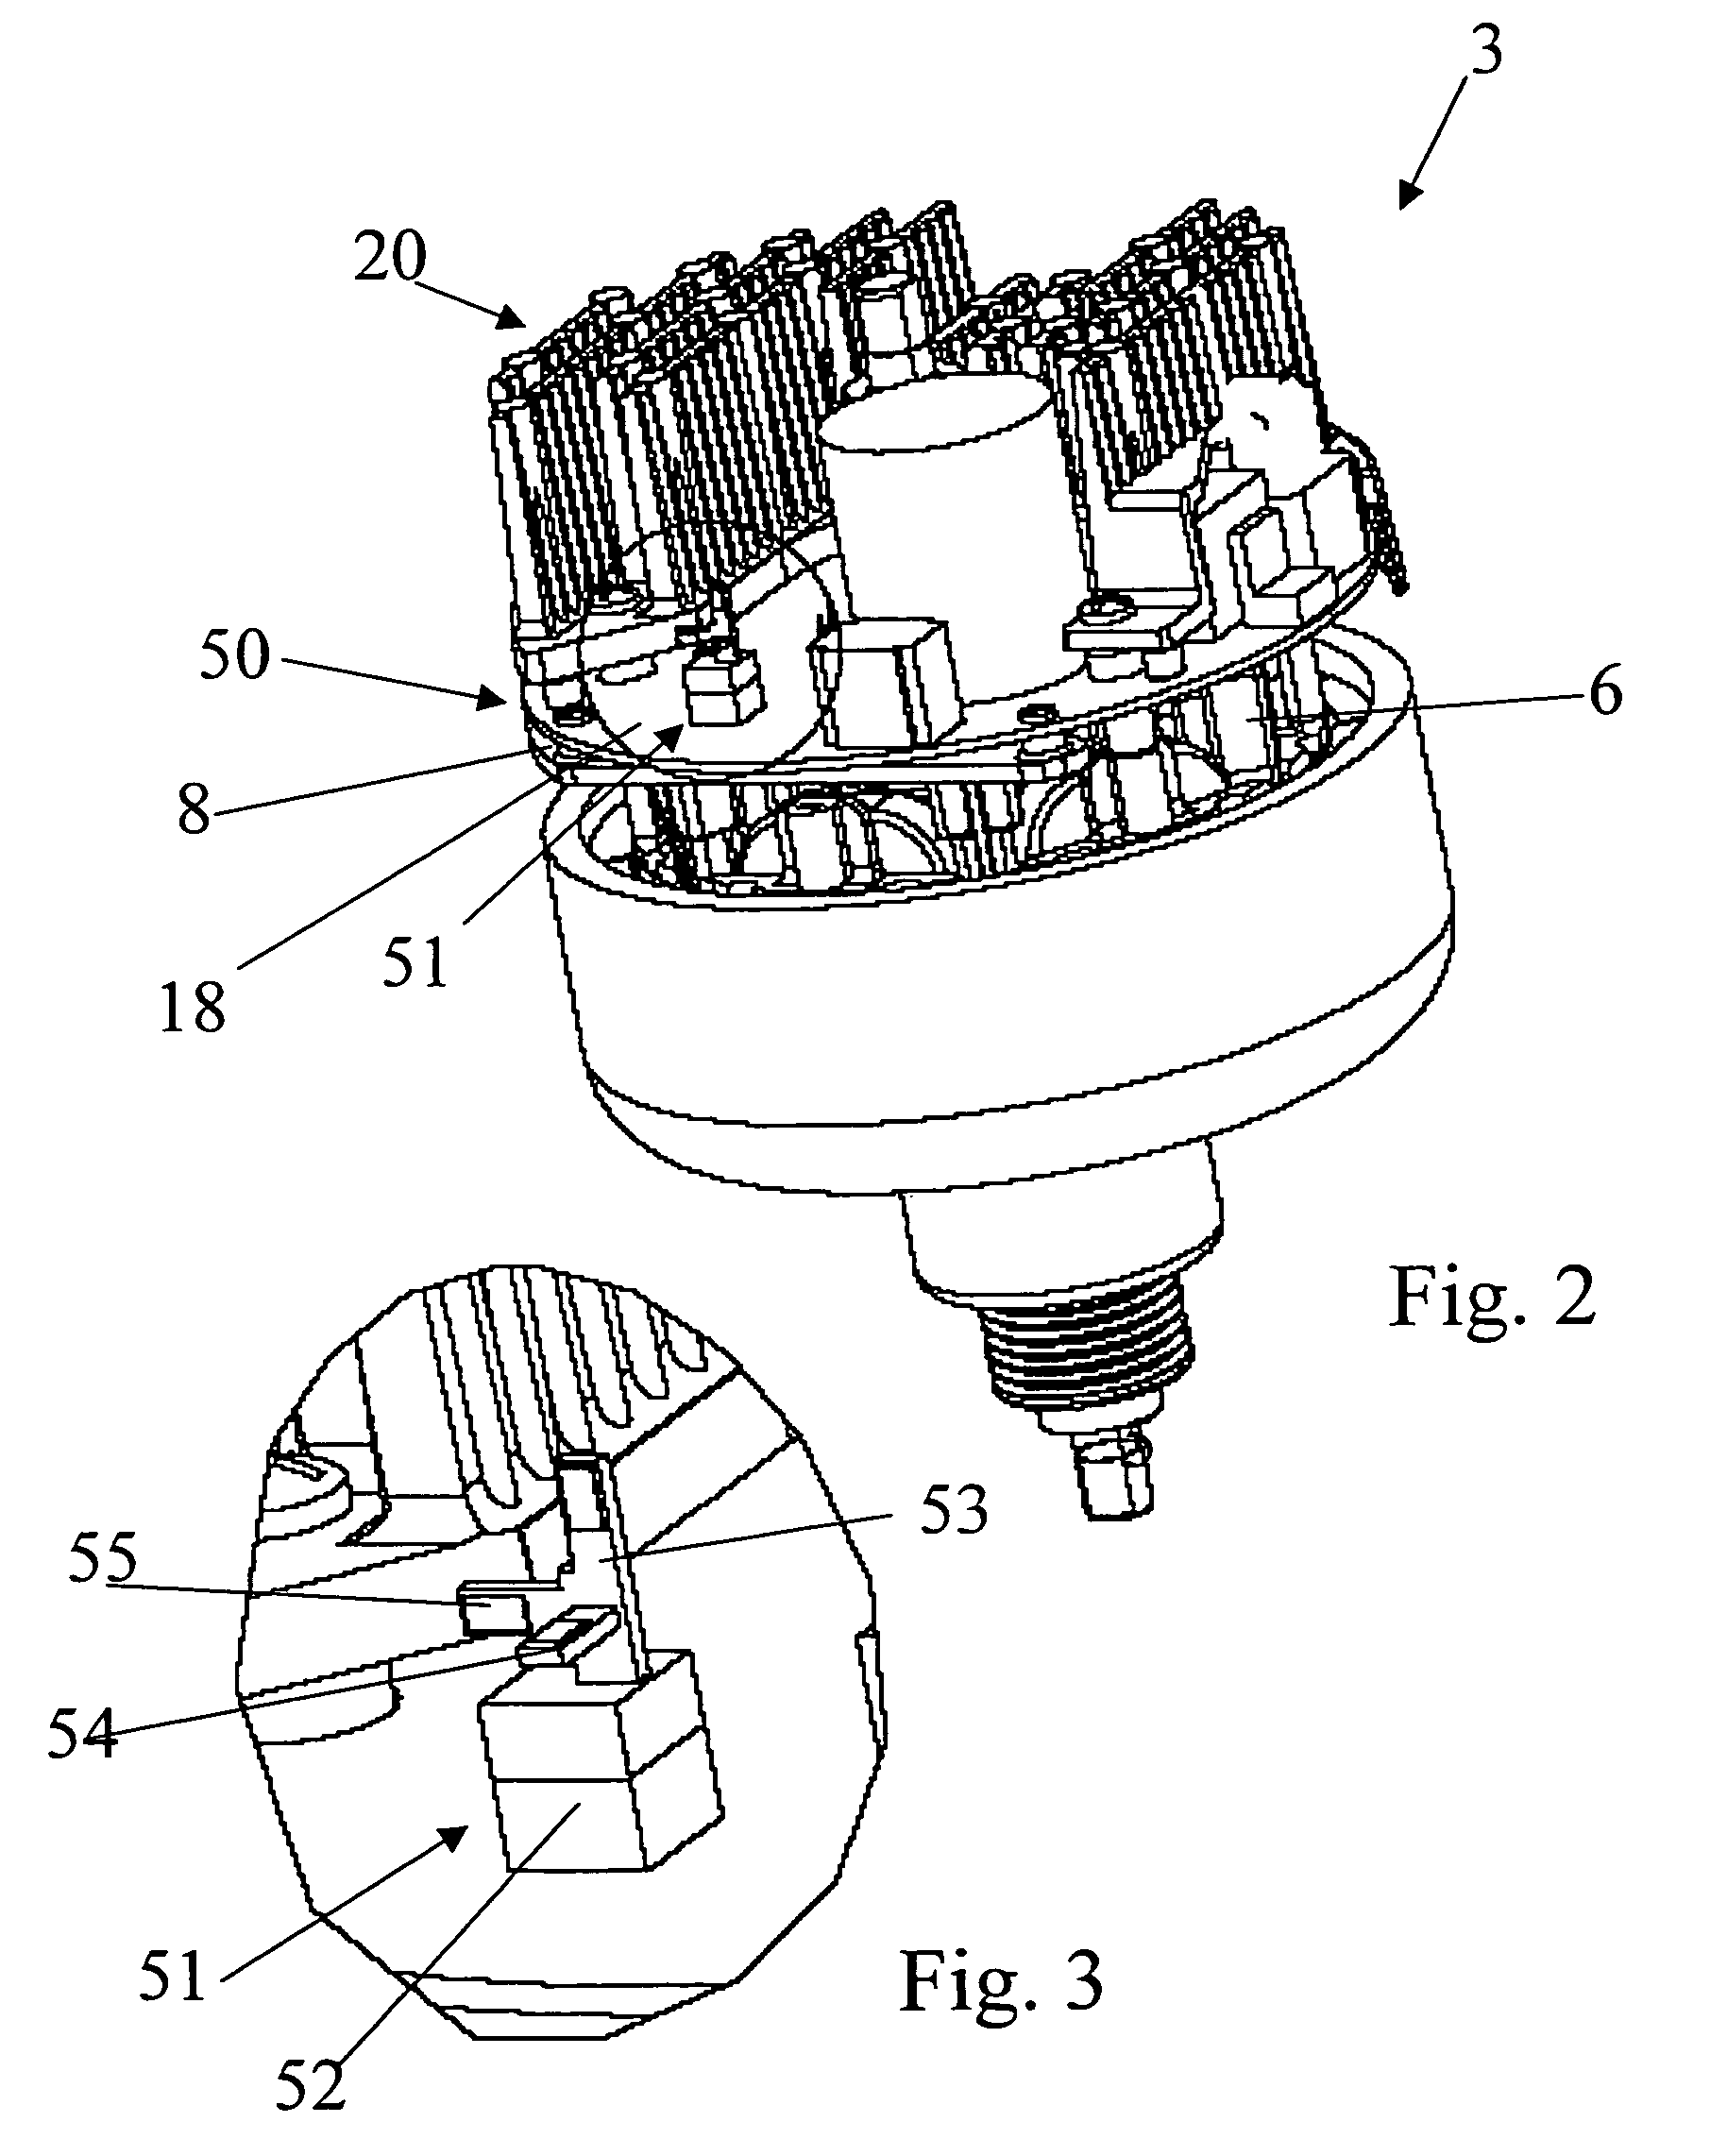 Detecting device of unbalance conditions particularly for washing machines and similar household appliances, activated by a synchronous electric motor